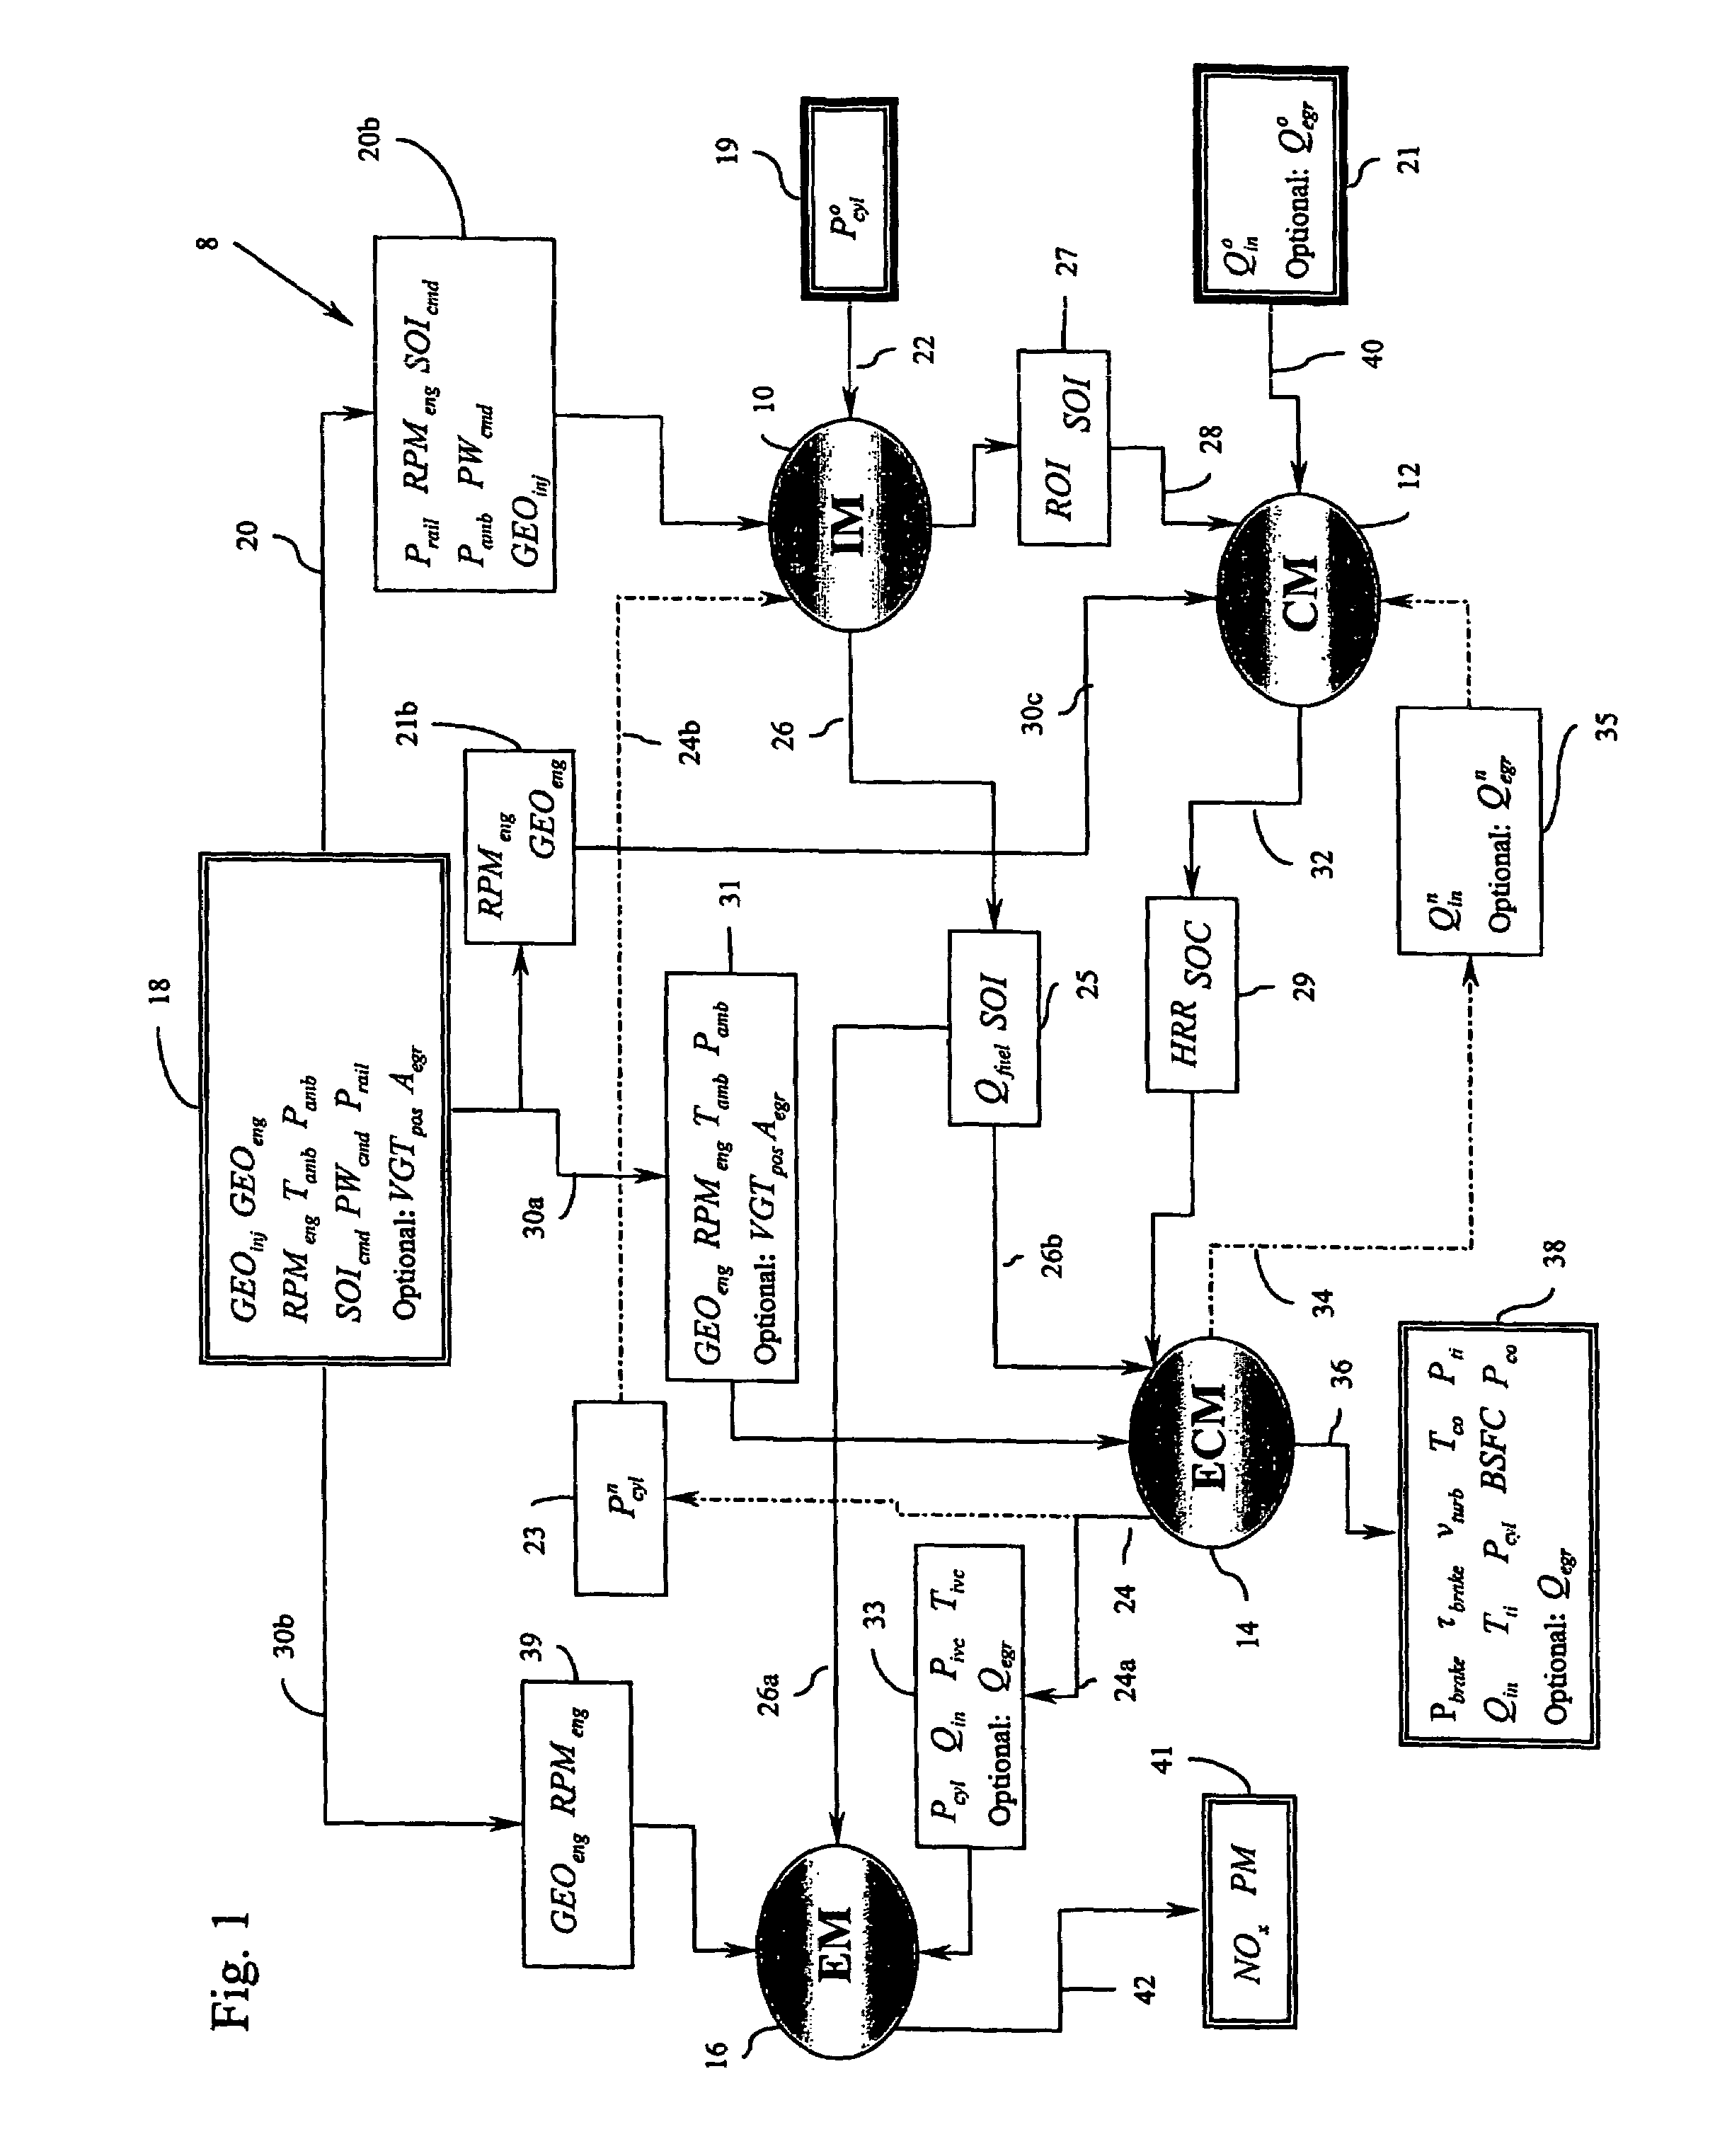 Method for controlling combustion in an internal combustion engine and predicting performance and emissions